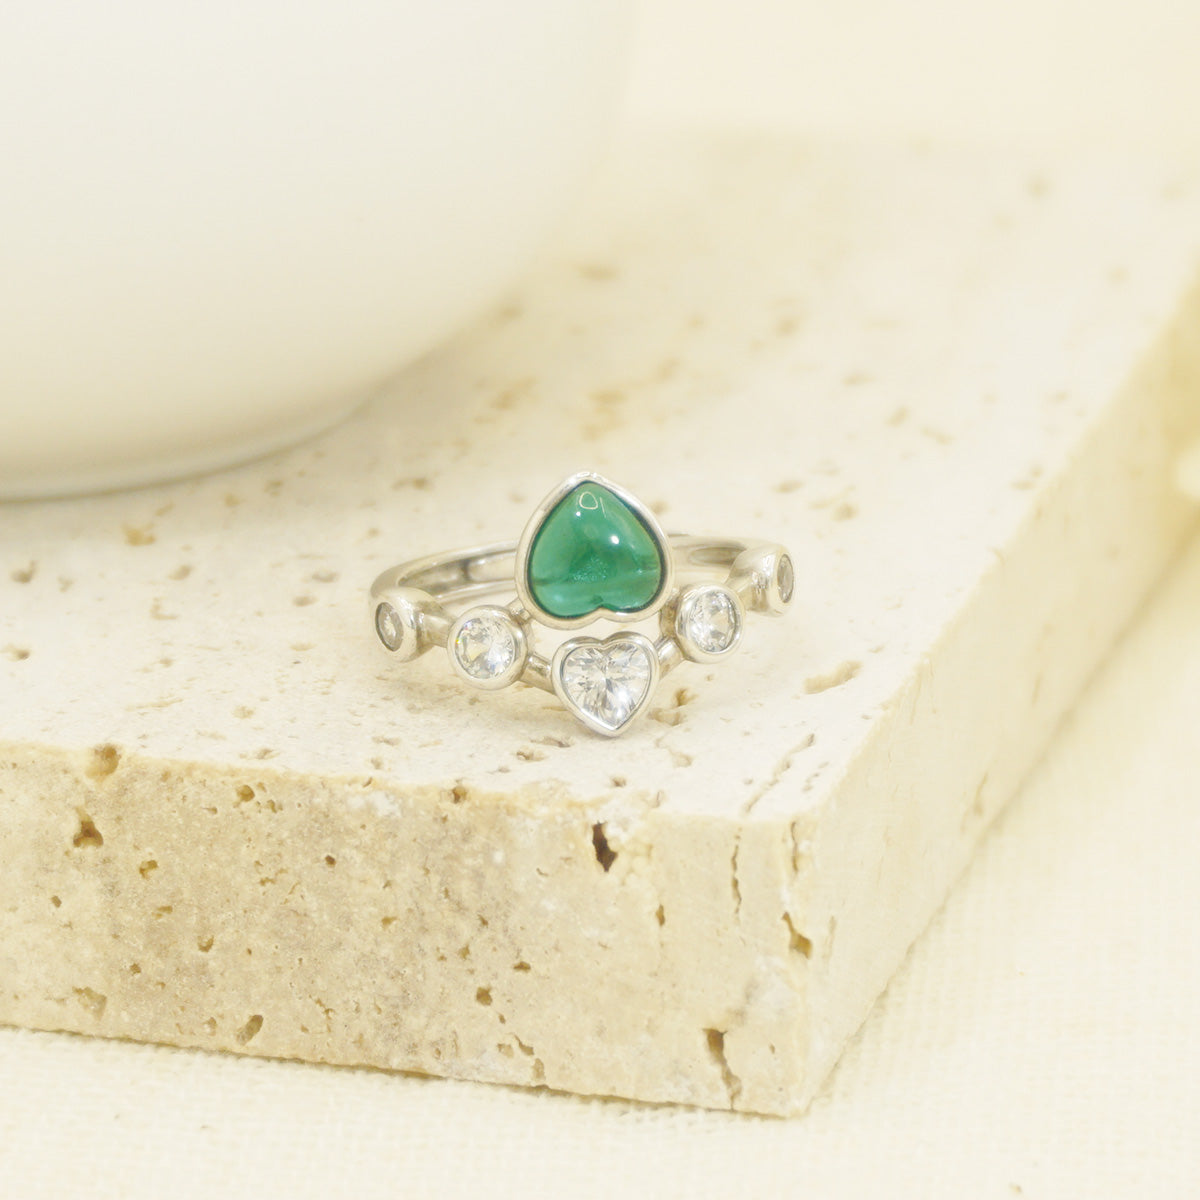 White Gold 2 Heart Crown Shape with Emerald Gem Band Ring for Women